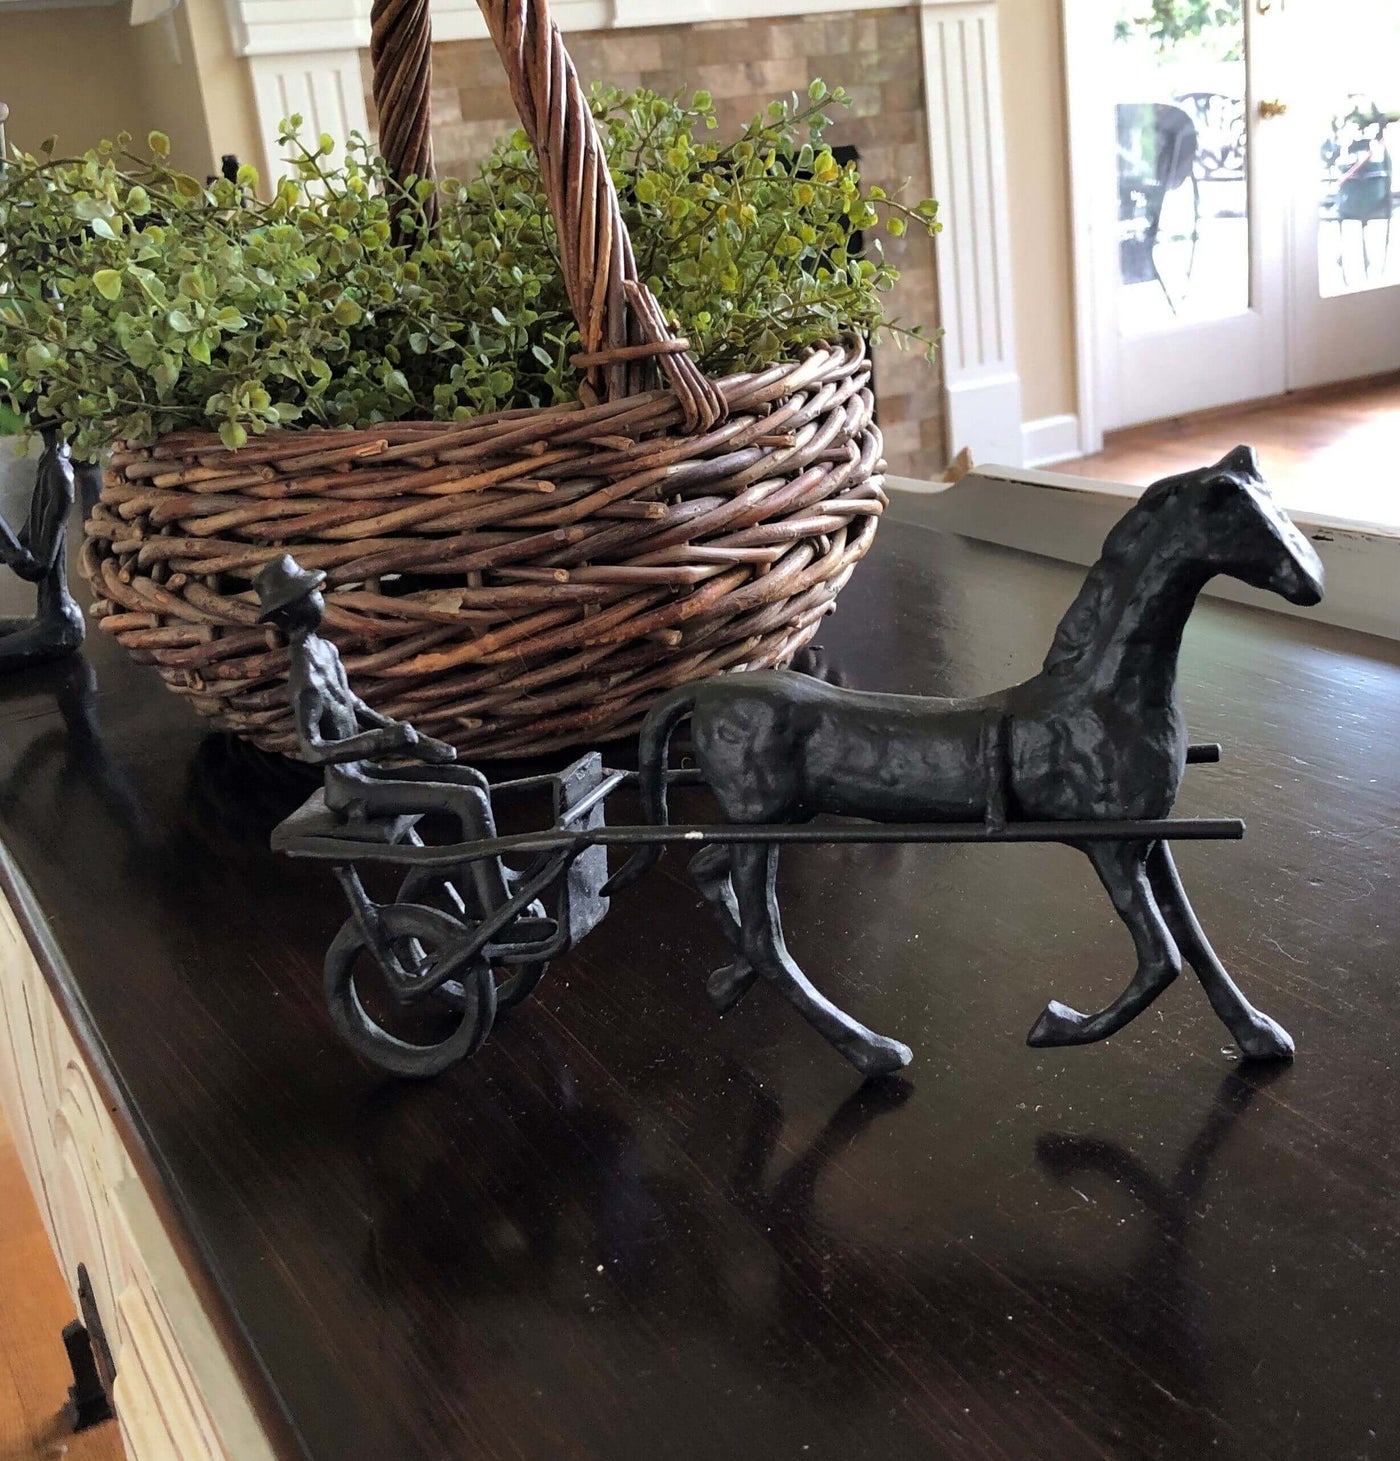 Horse and Cart Figurine - Cast Iron Metal Sculpture in partnership with Rustic Deco Incorporated